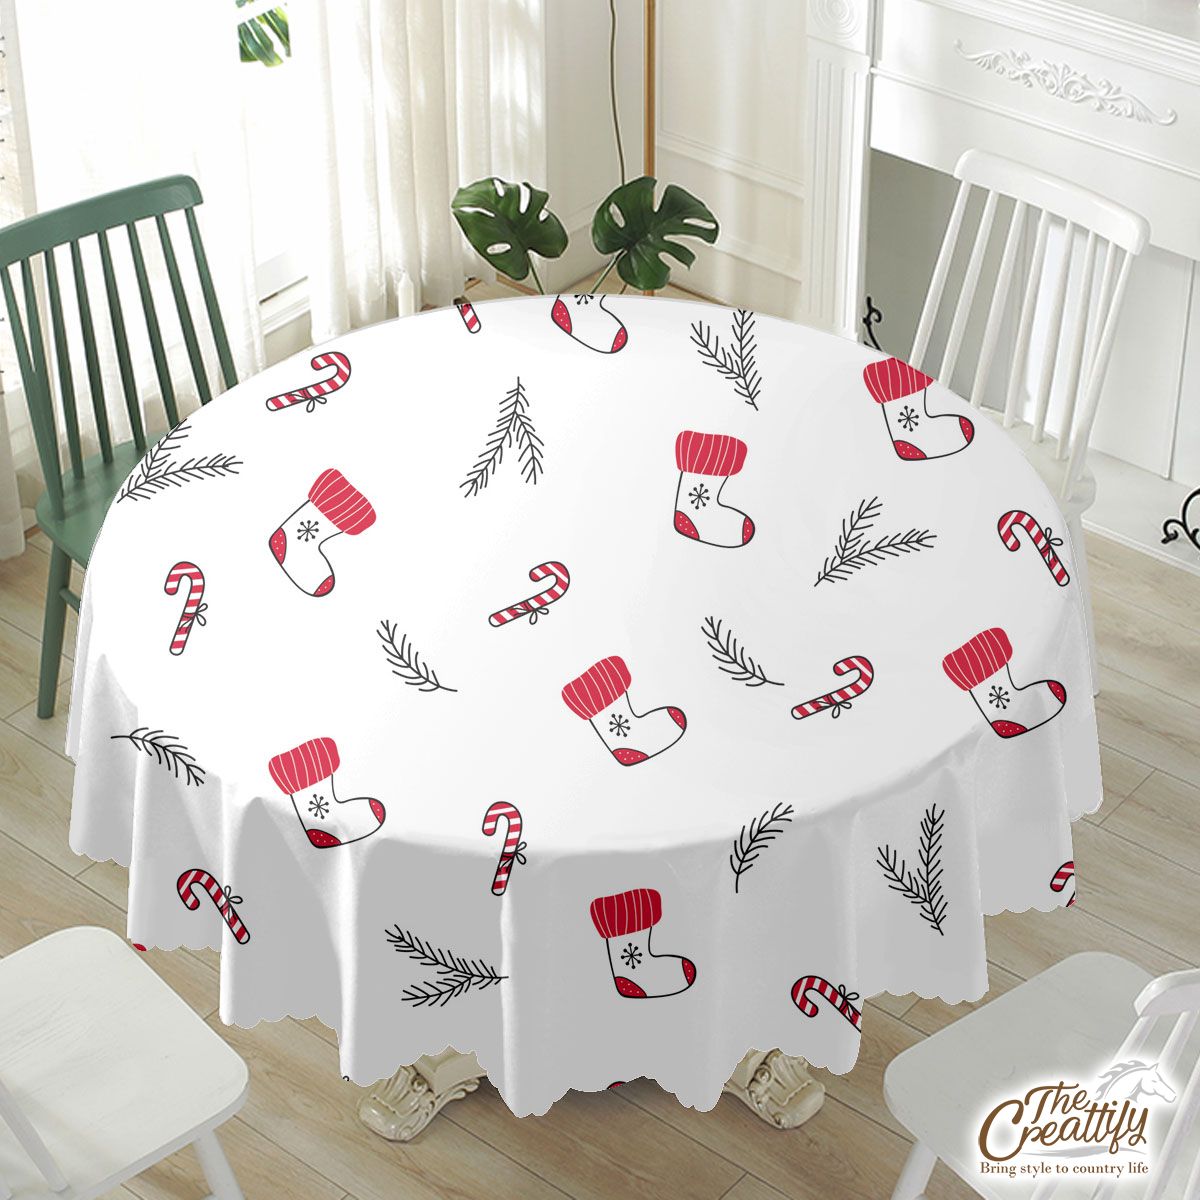 Hand Drawn Red Socks, Christmas Tree Branch And Candy Canes White Pattern Waterproof Tablecloth